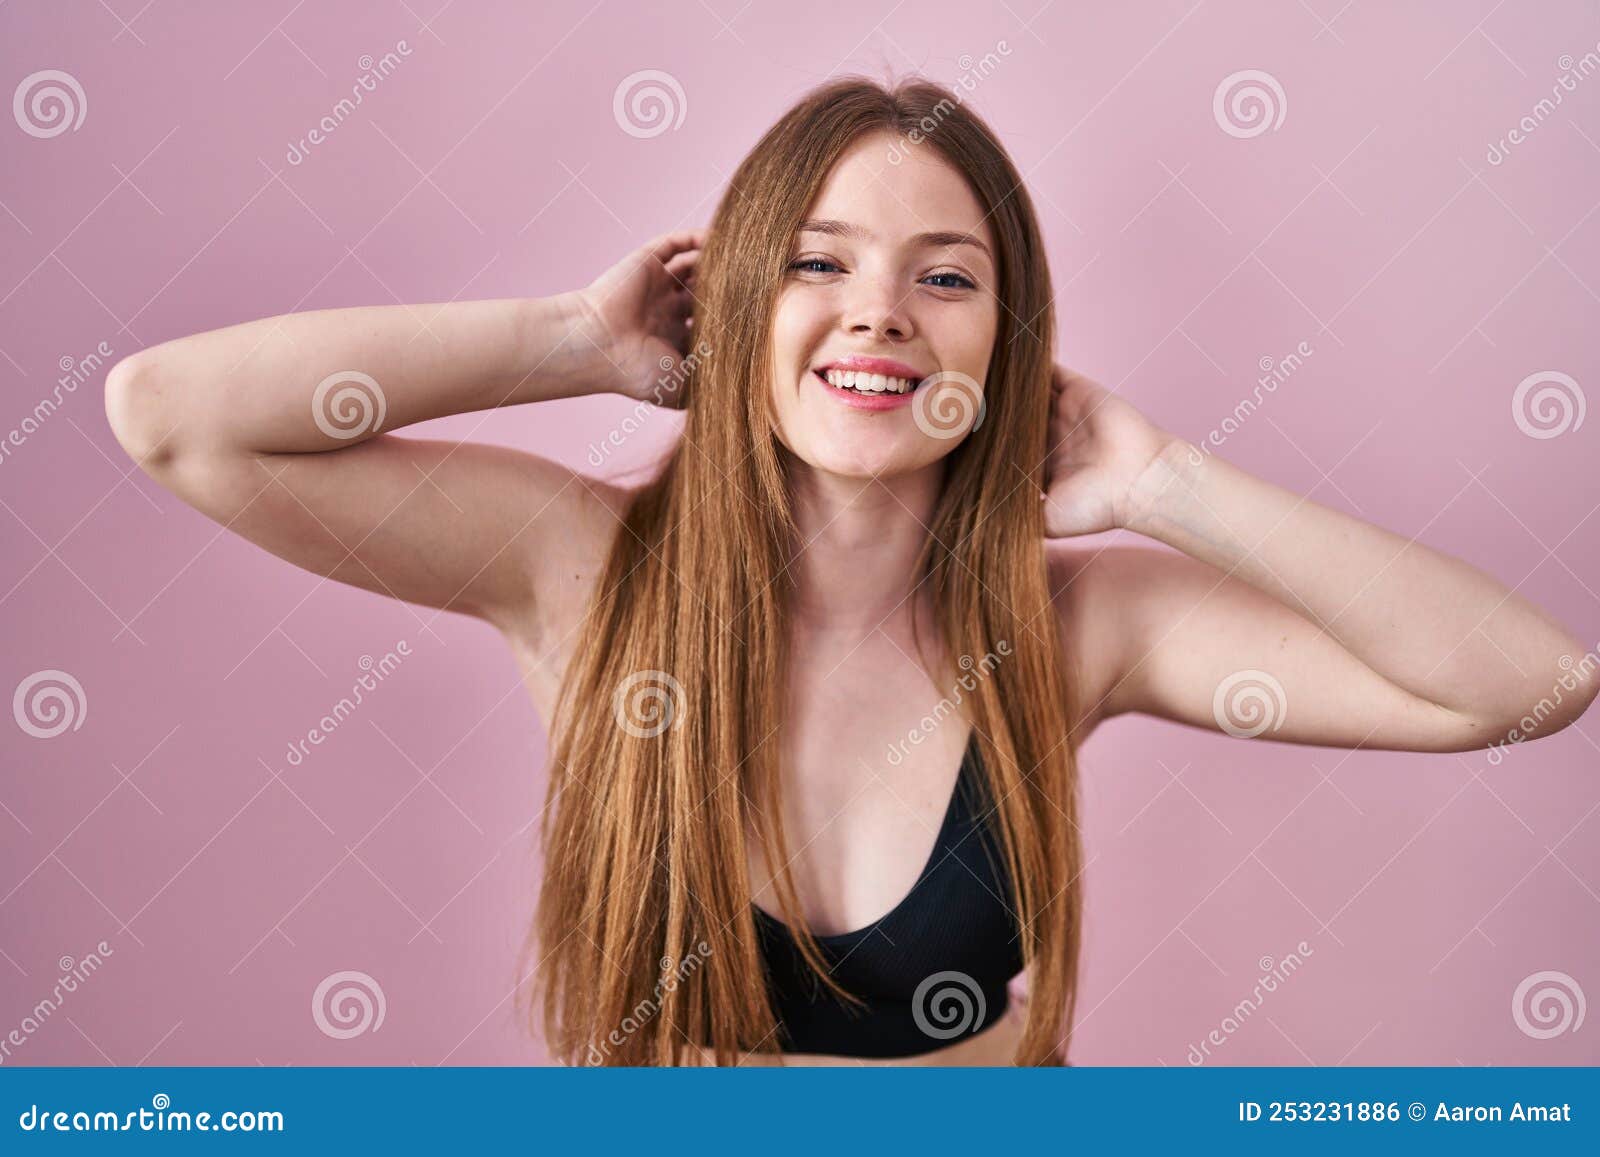 thick woman in lingerie lying at sunlight on fur laughing Stock Photo